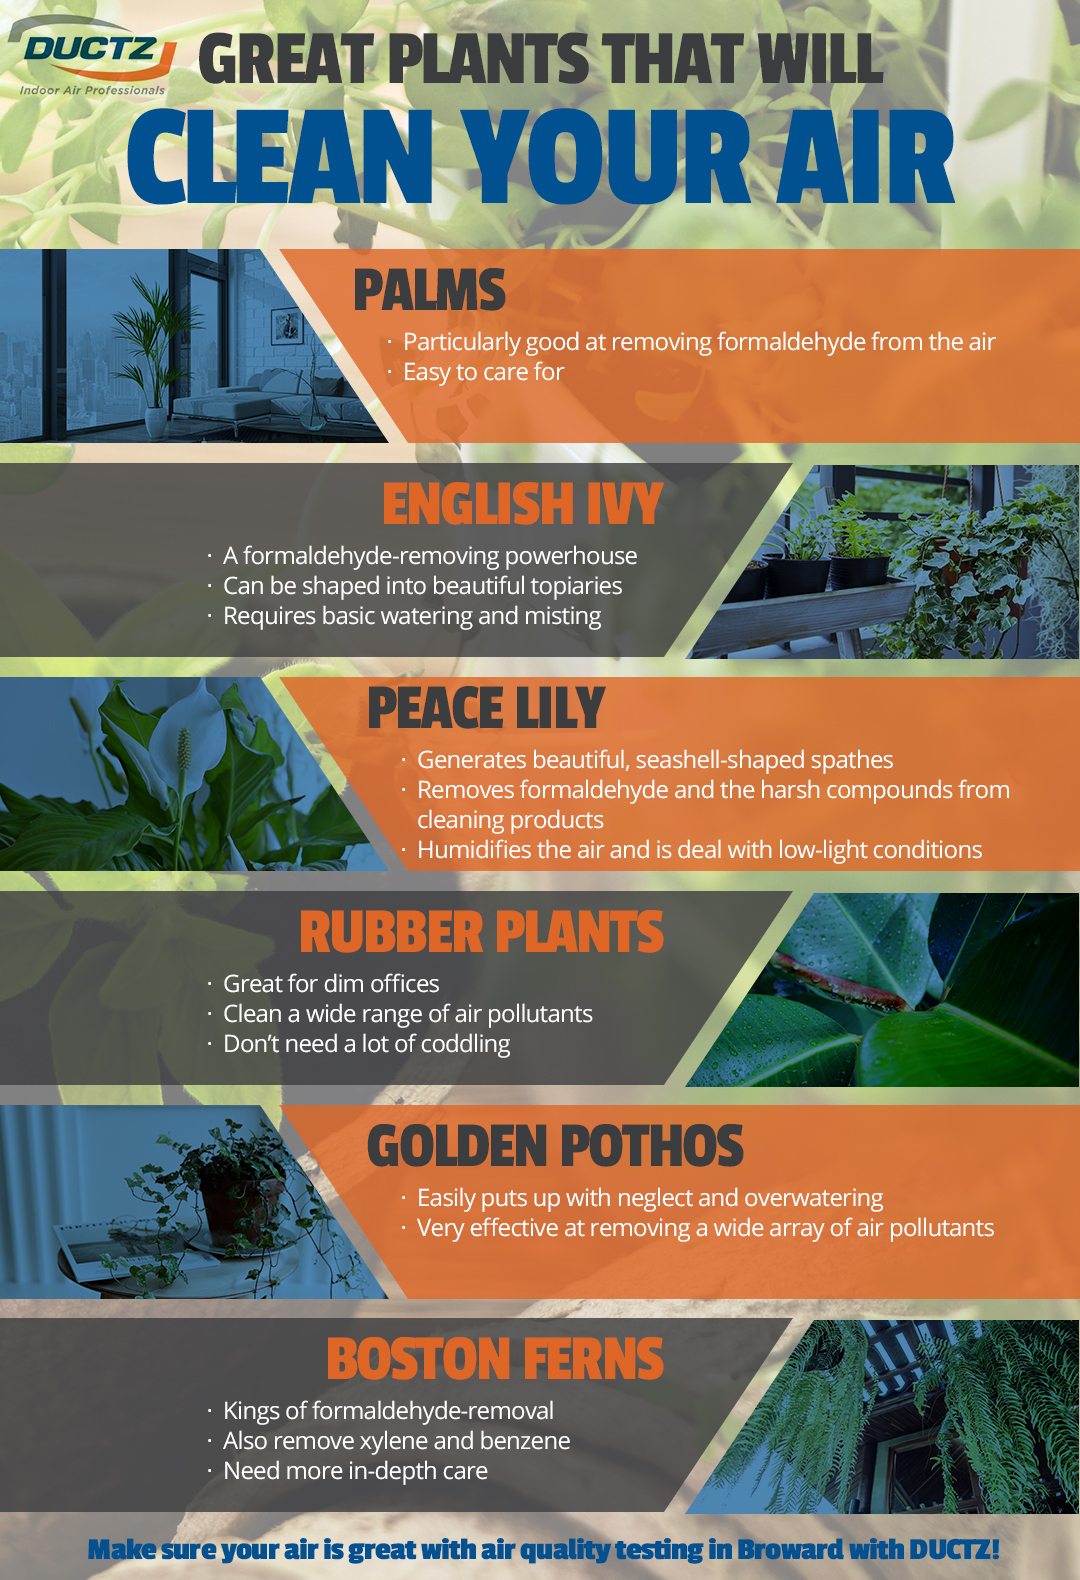 Great Plants That Will Clean Your Air